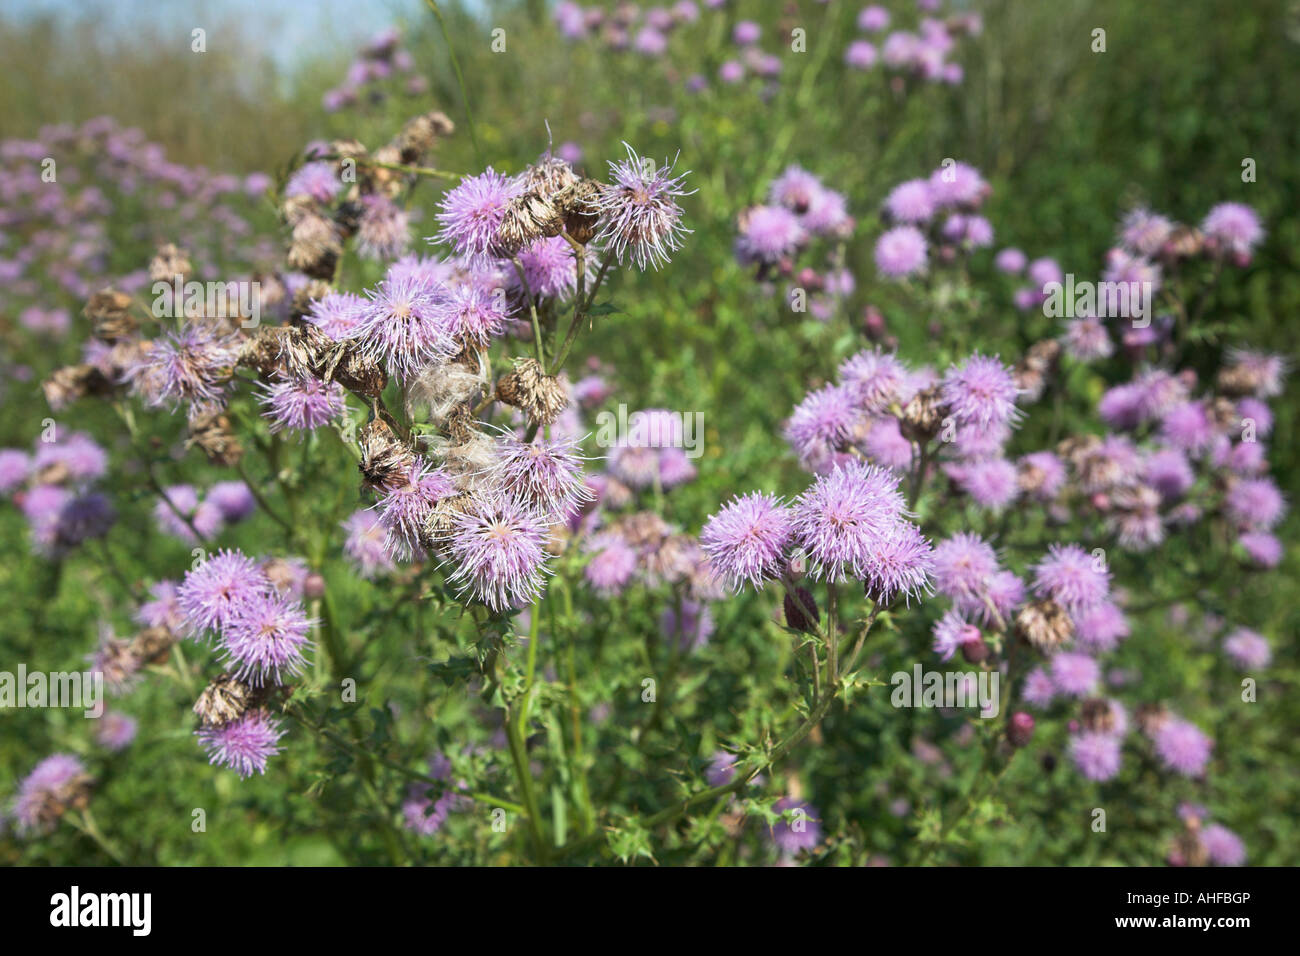 Purple flowers of thistles in country hedgerow, Suffolk, England, UK Stock Photo